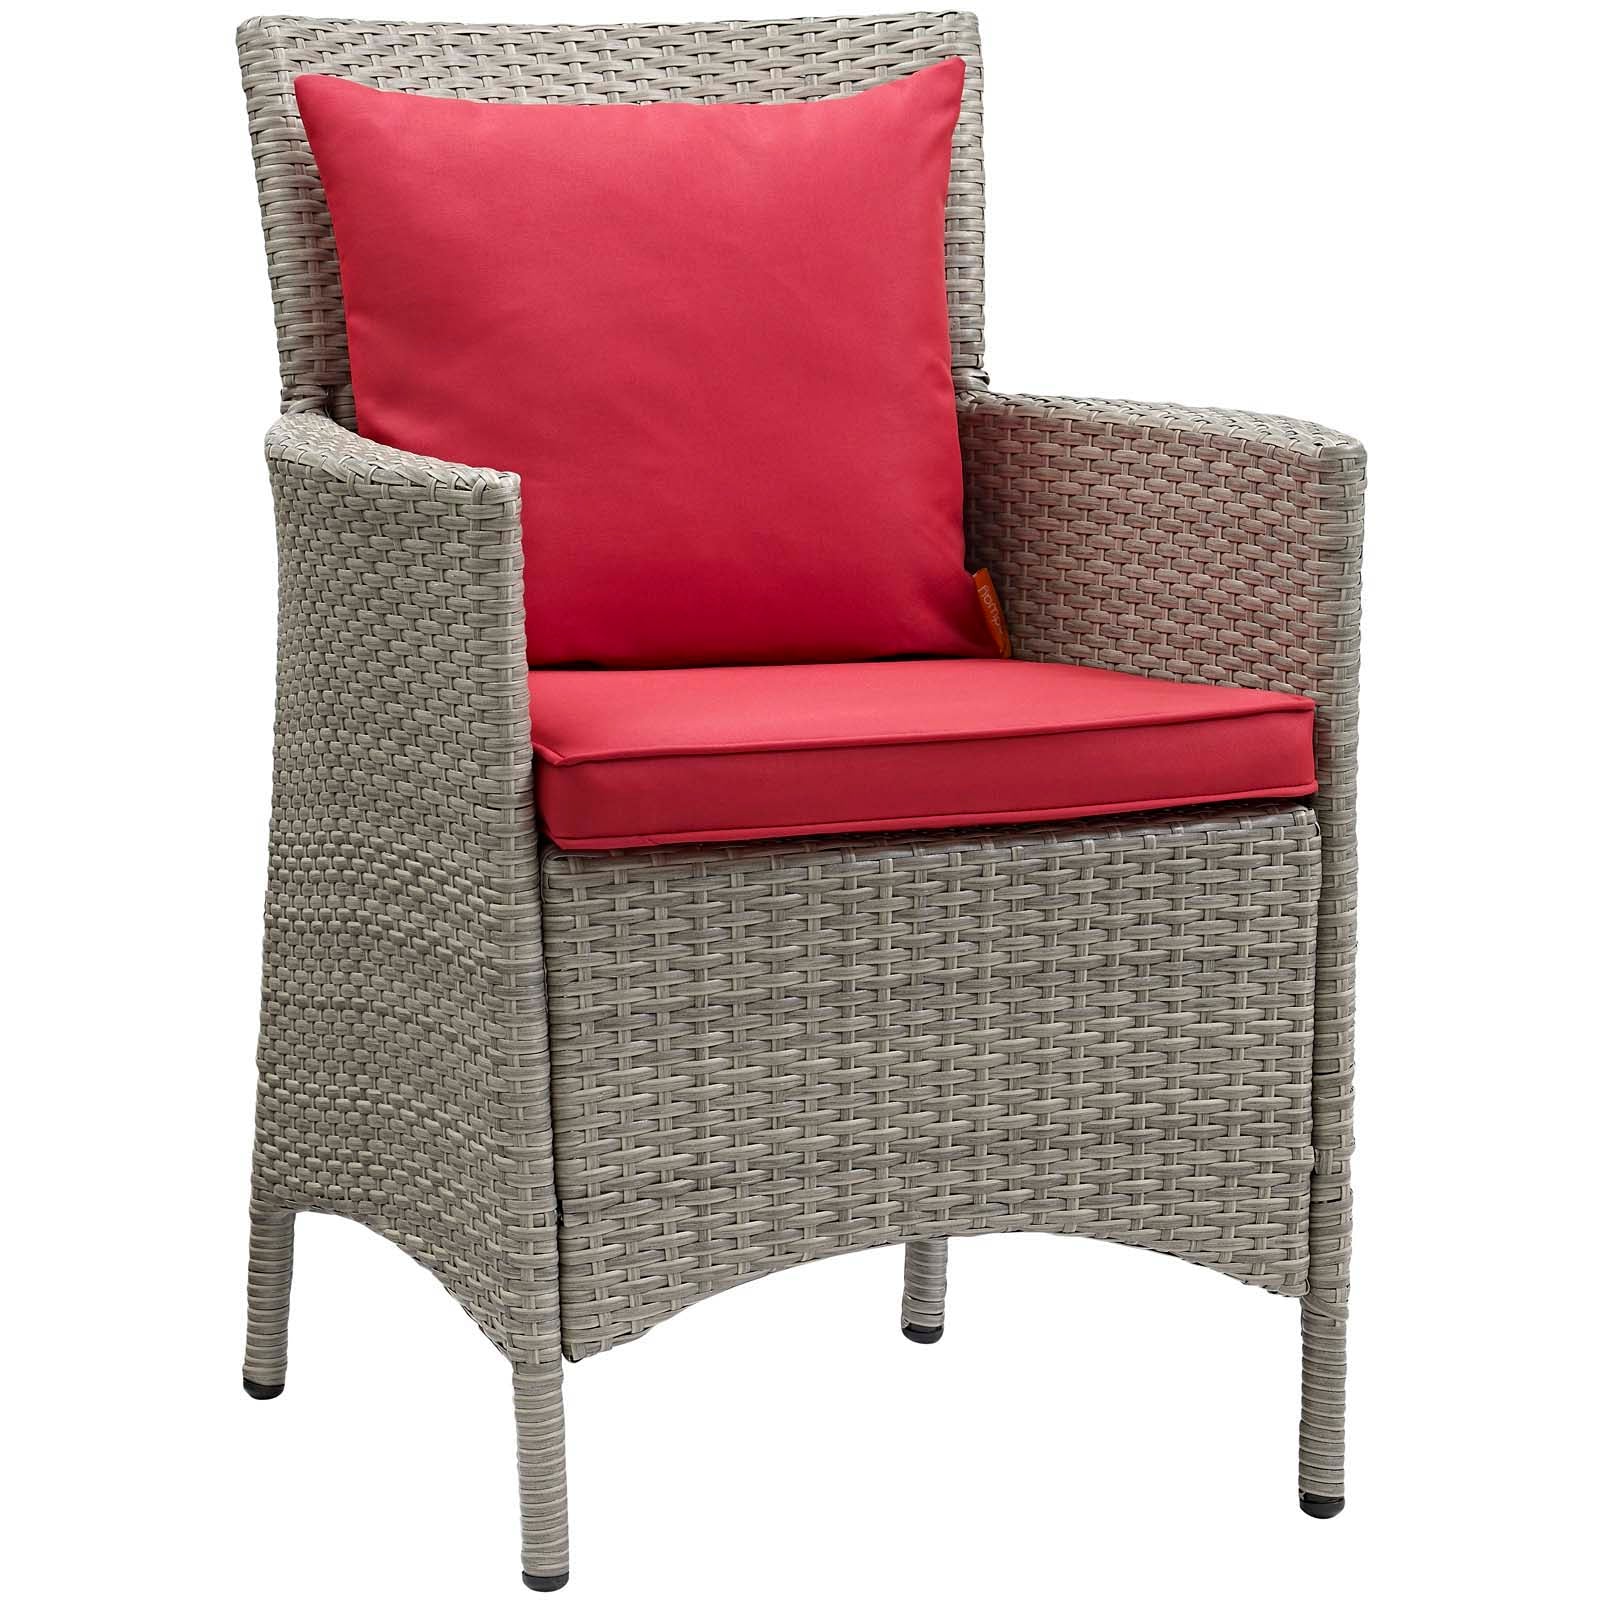 Modway Outdoor Dining Chairs - Conduit Outdoor Patio Wicker Rattan Dining Armchair Set of 4 Light Gray Red